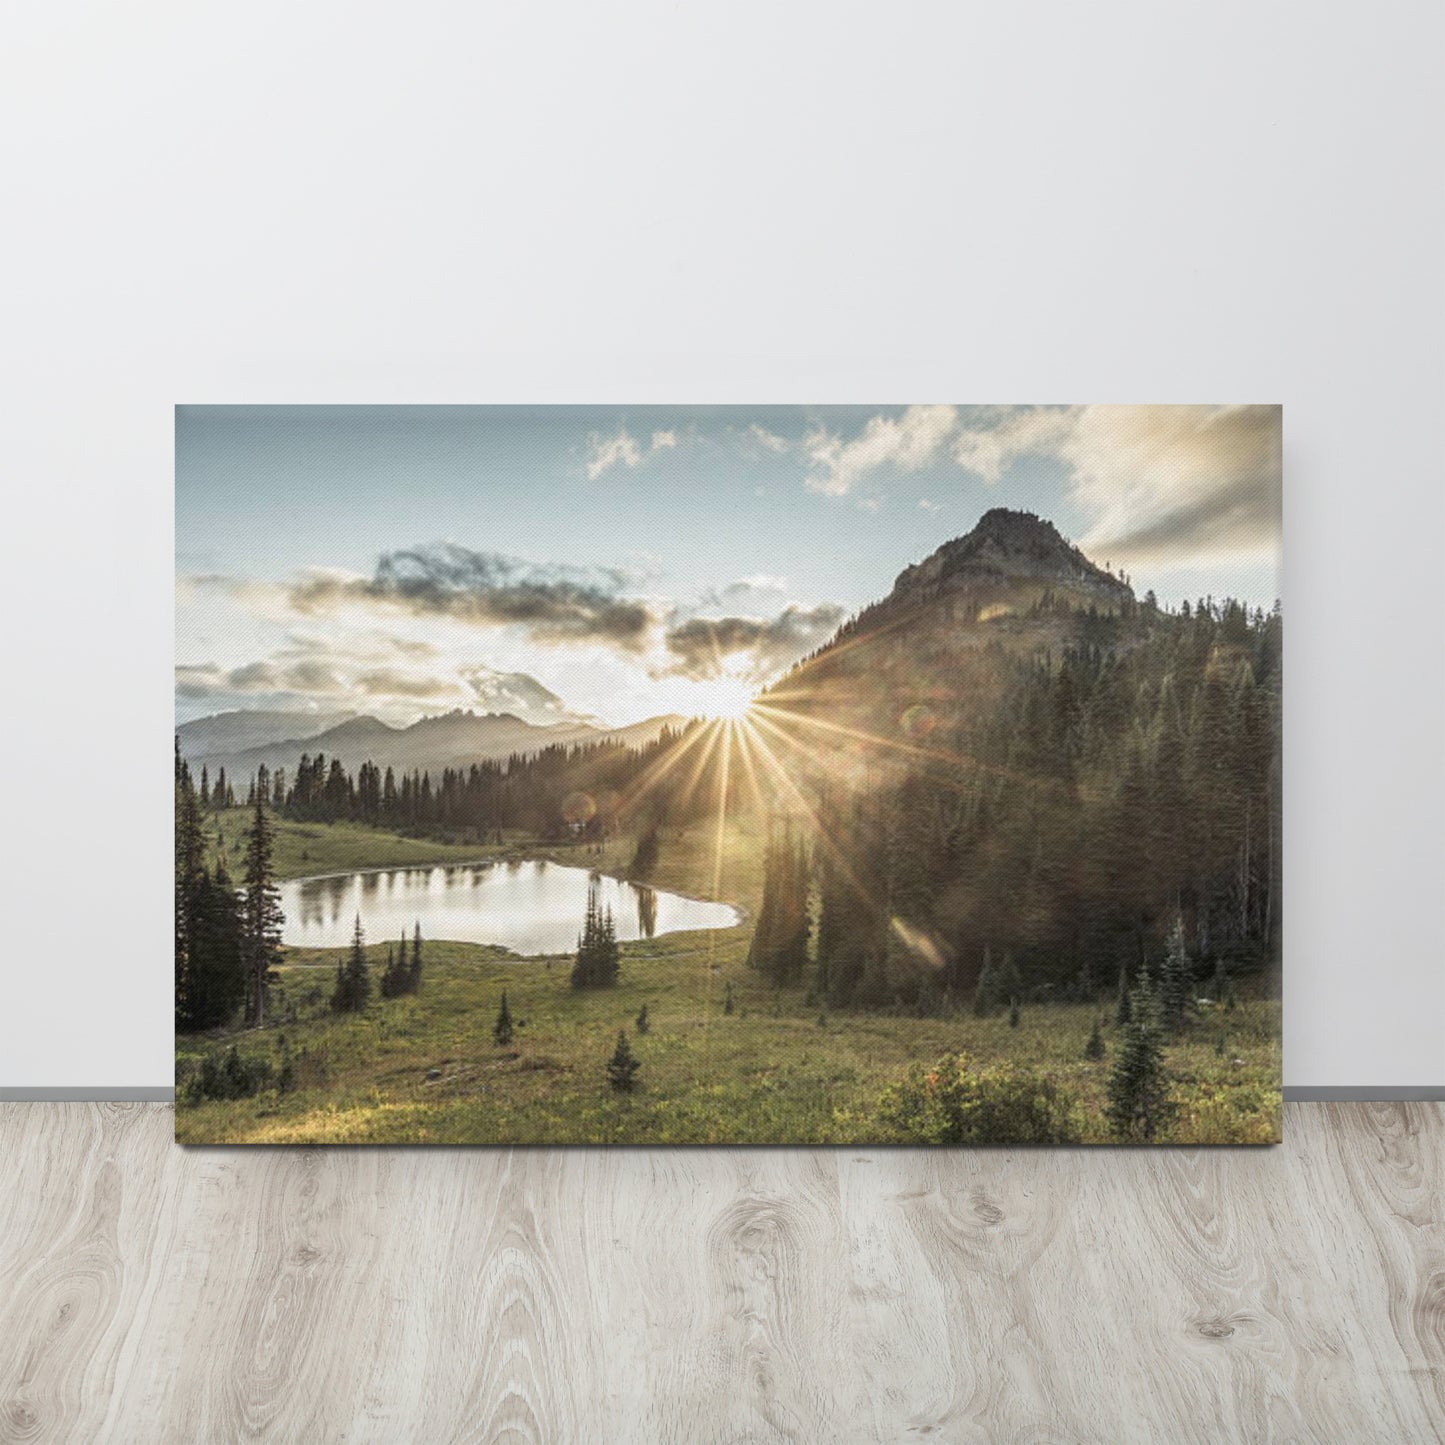 Dresser Wall Decor: At Peace - Sunset Mountain and Lake Rural / Country / Farmhouse Style Nature / Landscape Photograph Wall Art Print